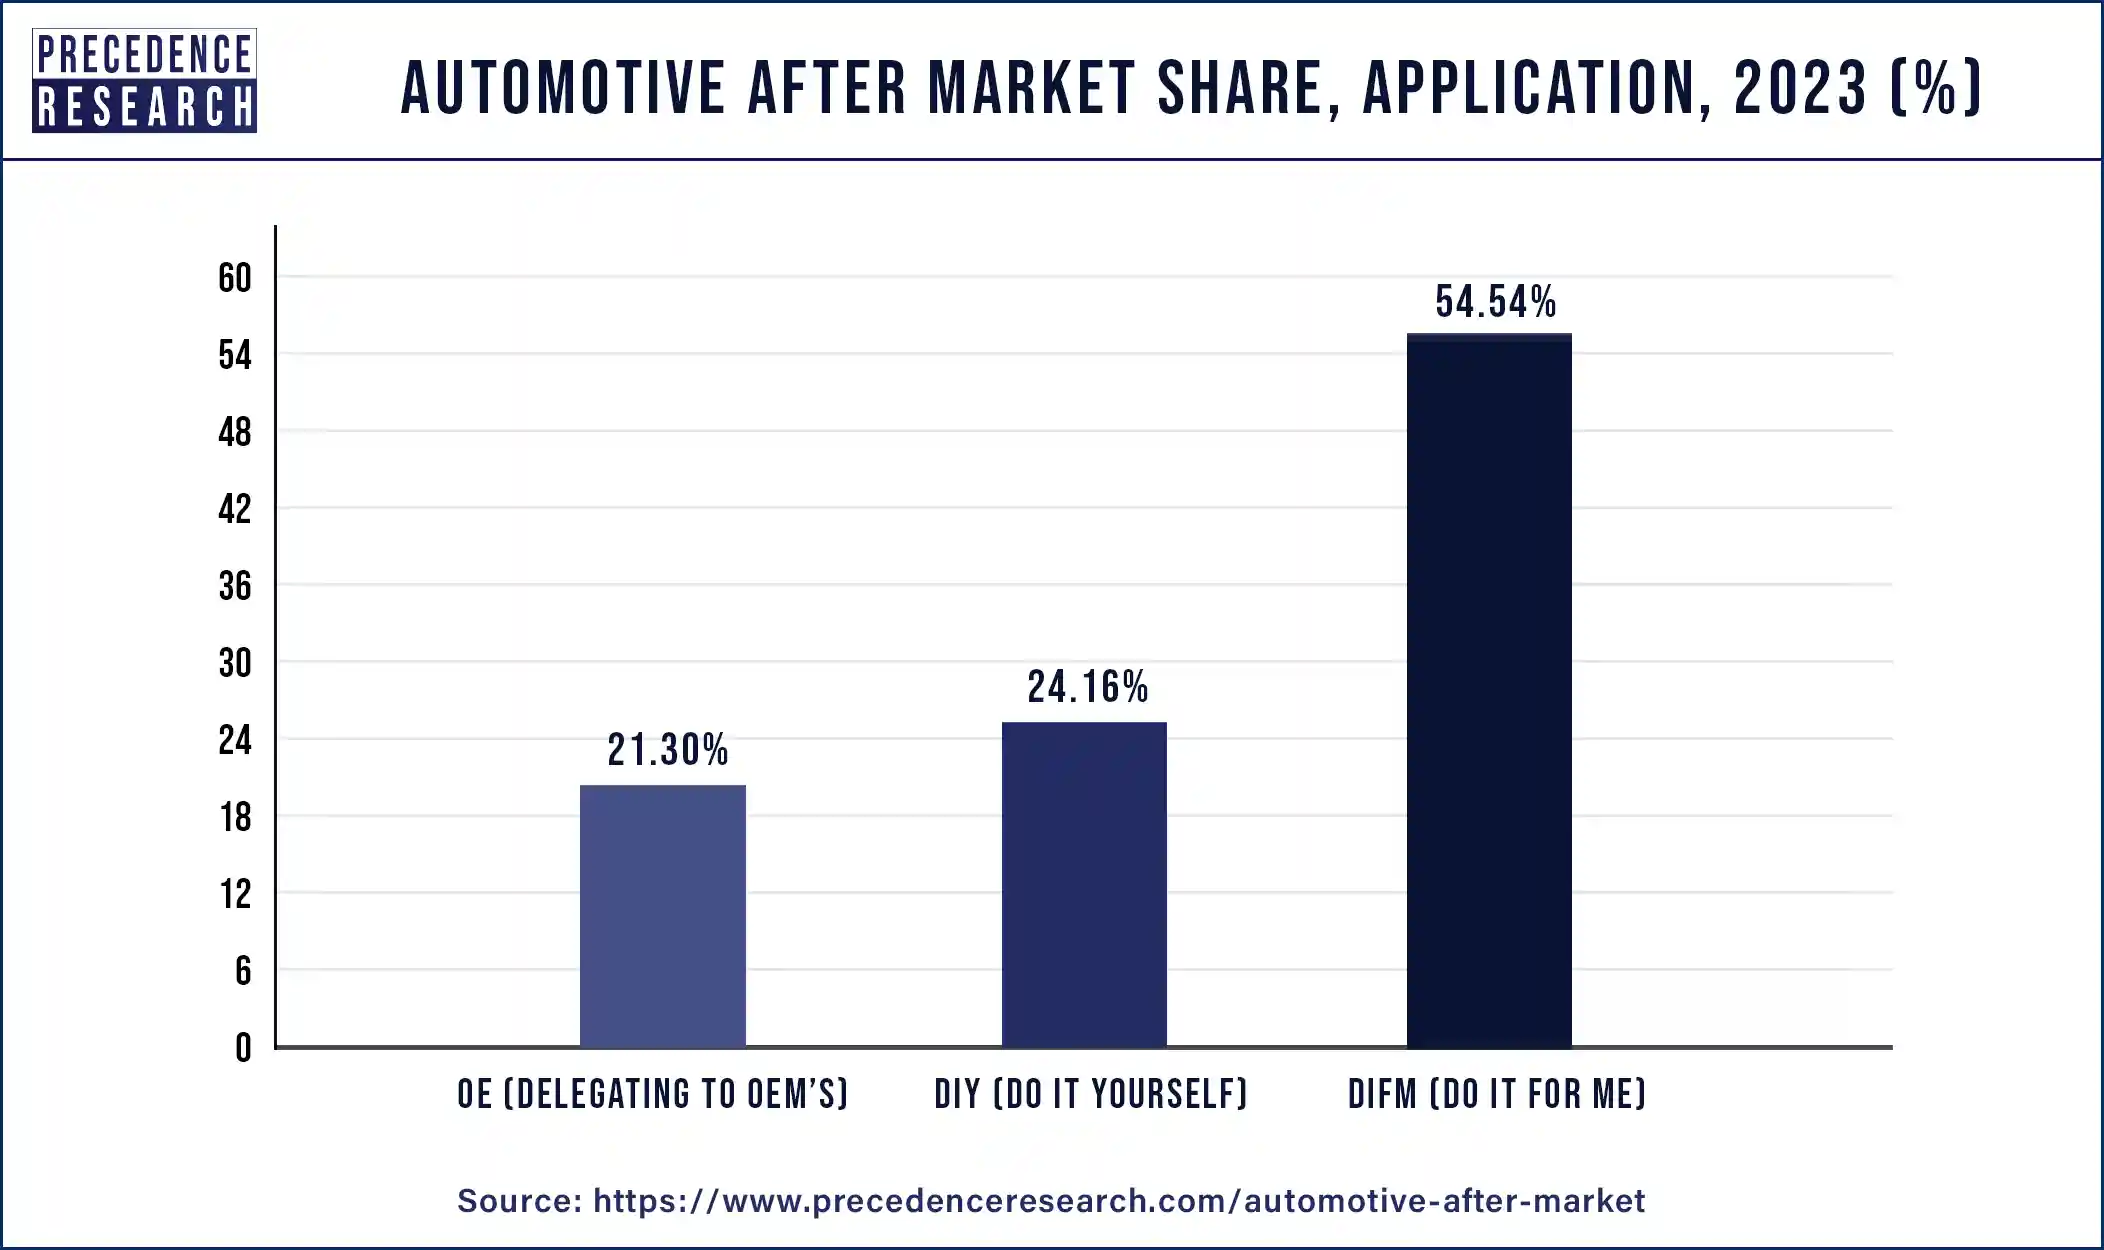 Automotive Aftermarket Share, By Application, 2023 (%)